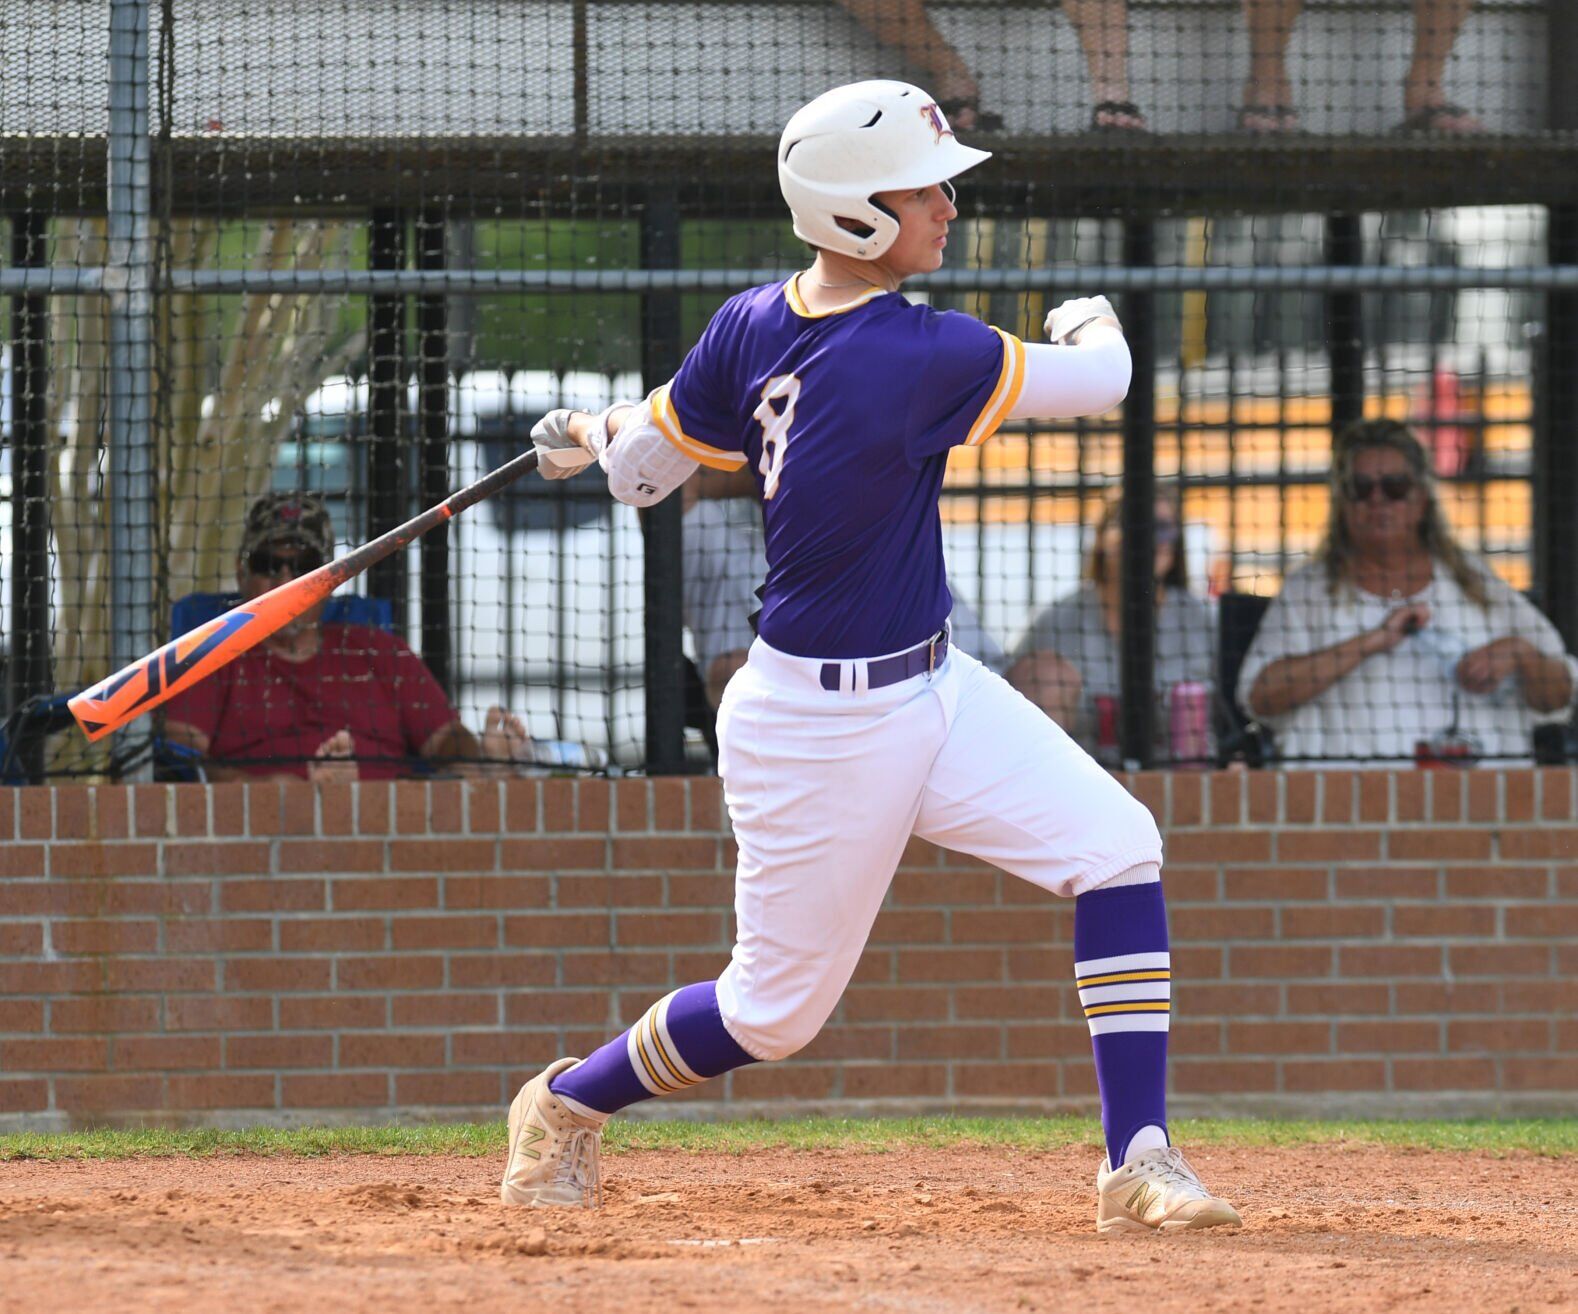 Lutcher has an LSU-bound ace who homered in the first inning of a semifinal shutout